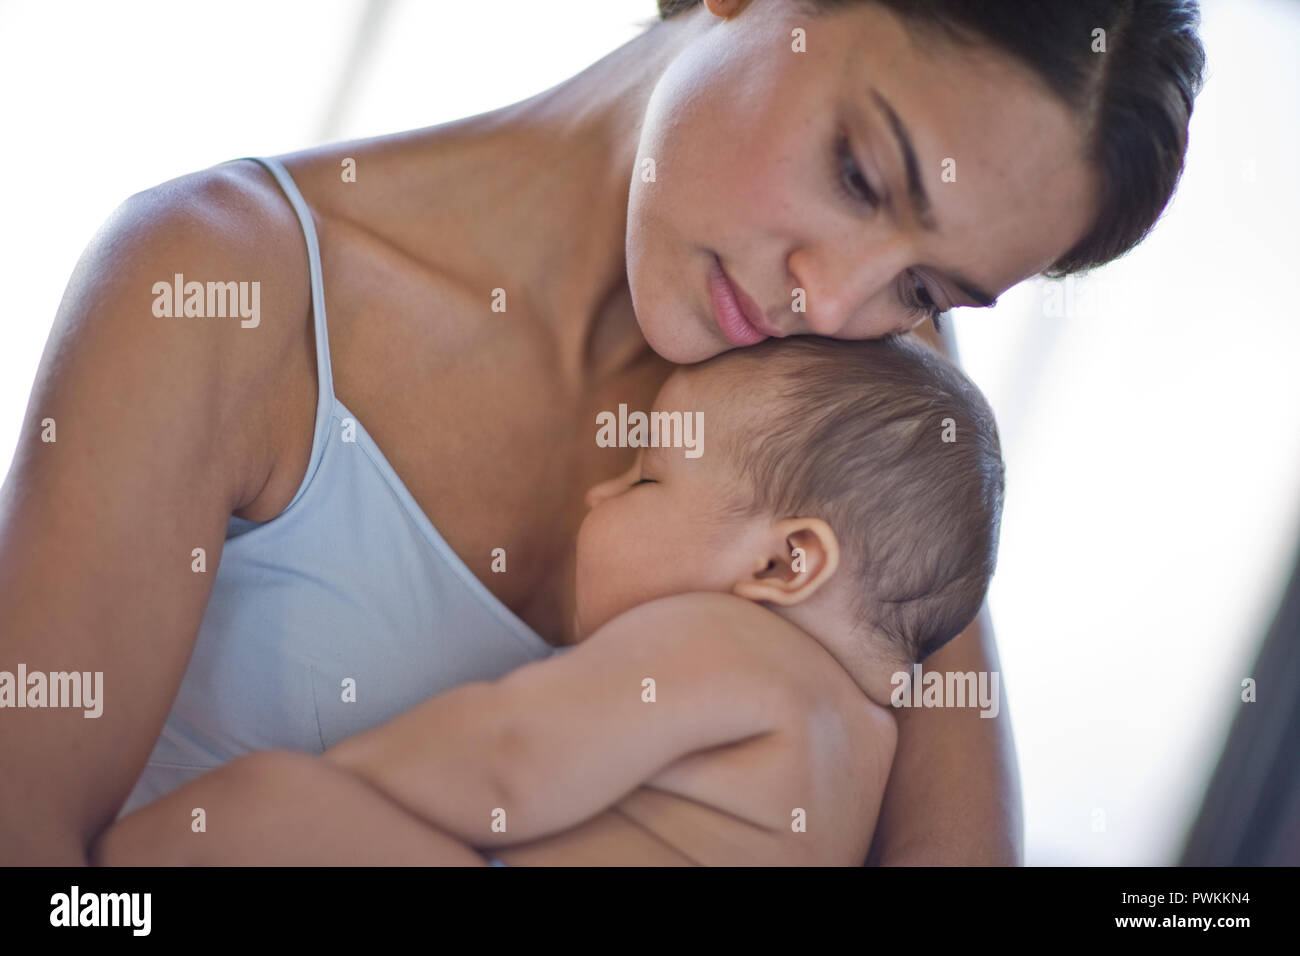 Contemplative young woman holding her baby. Stock Photo